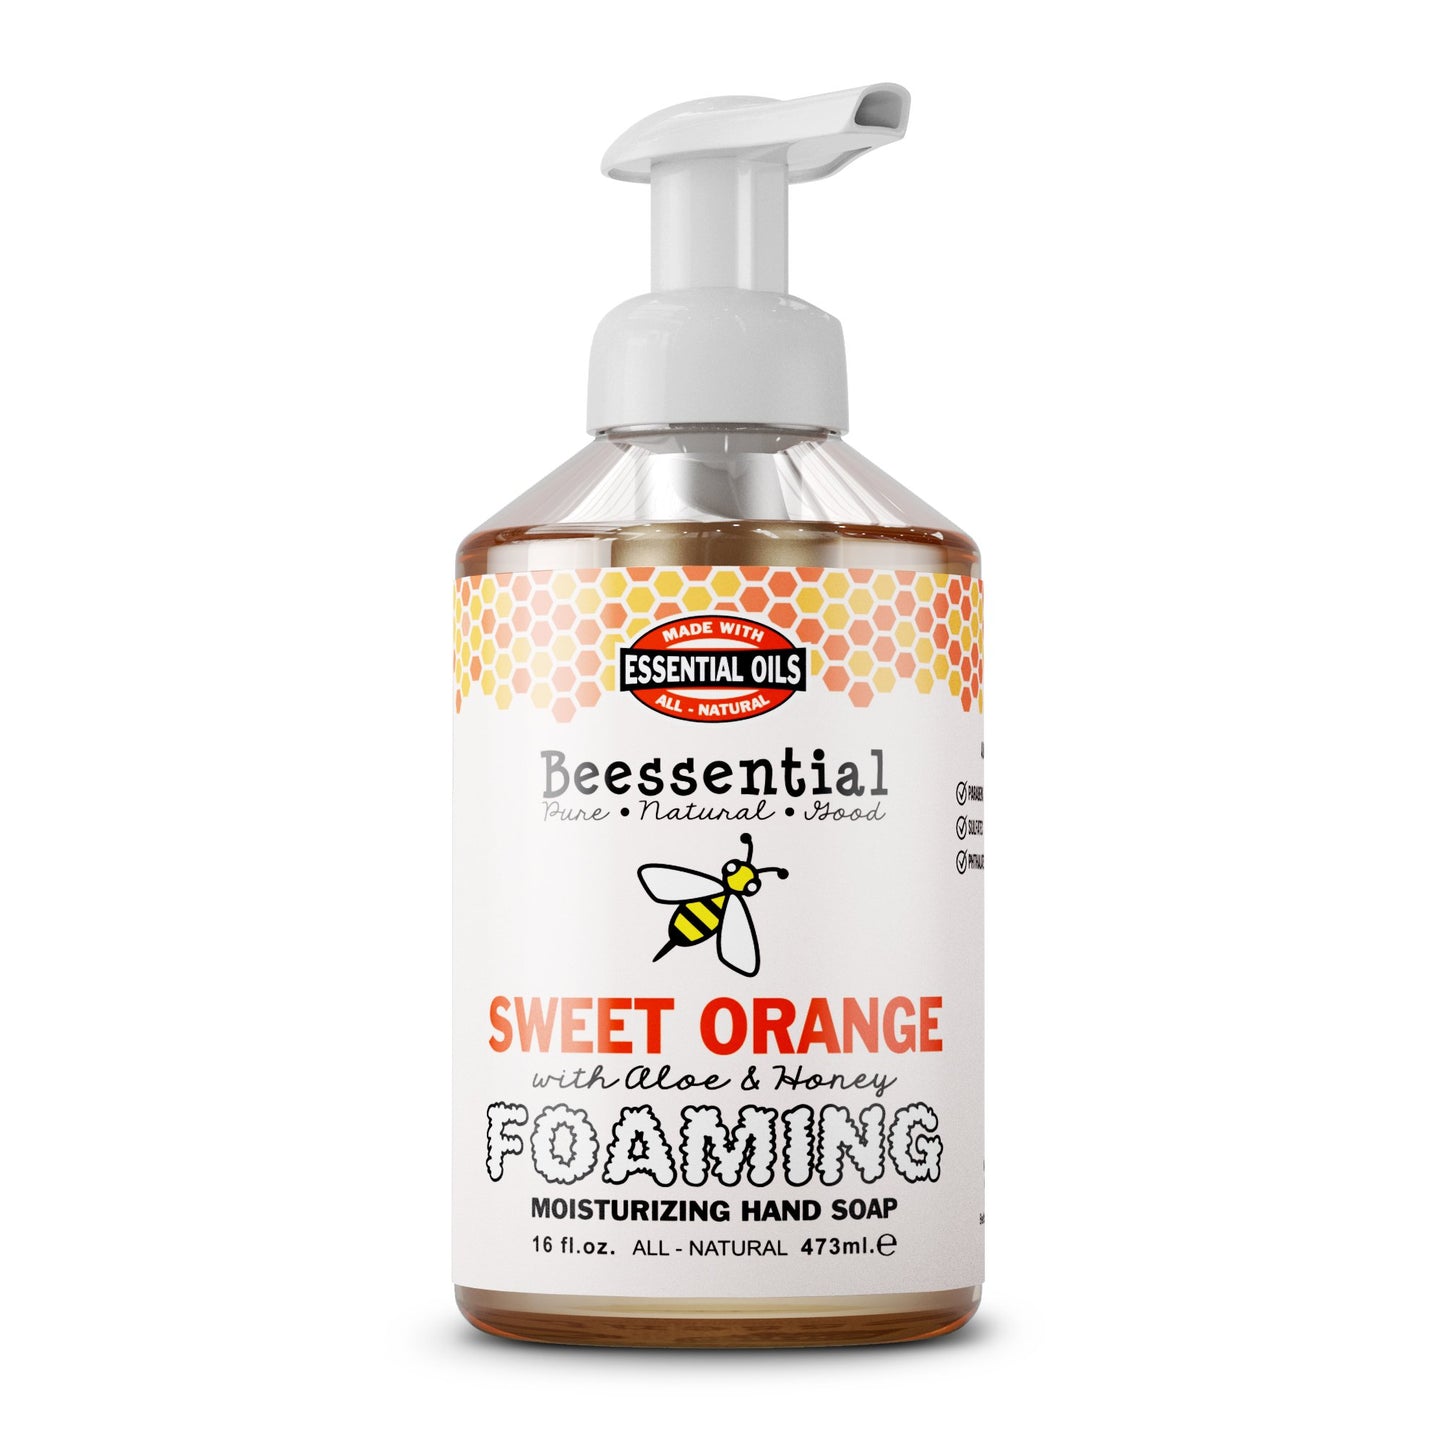 Natural Foaming Handsoap with Essential Oils 16oz